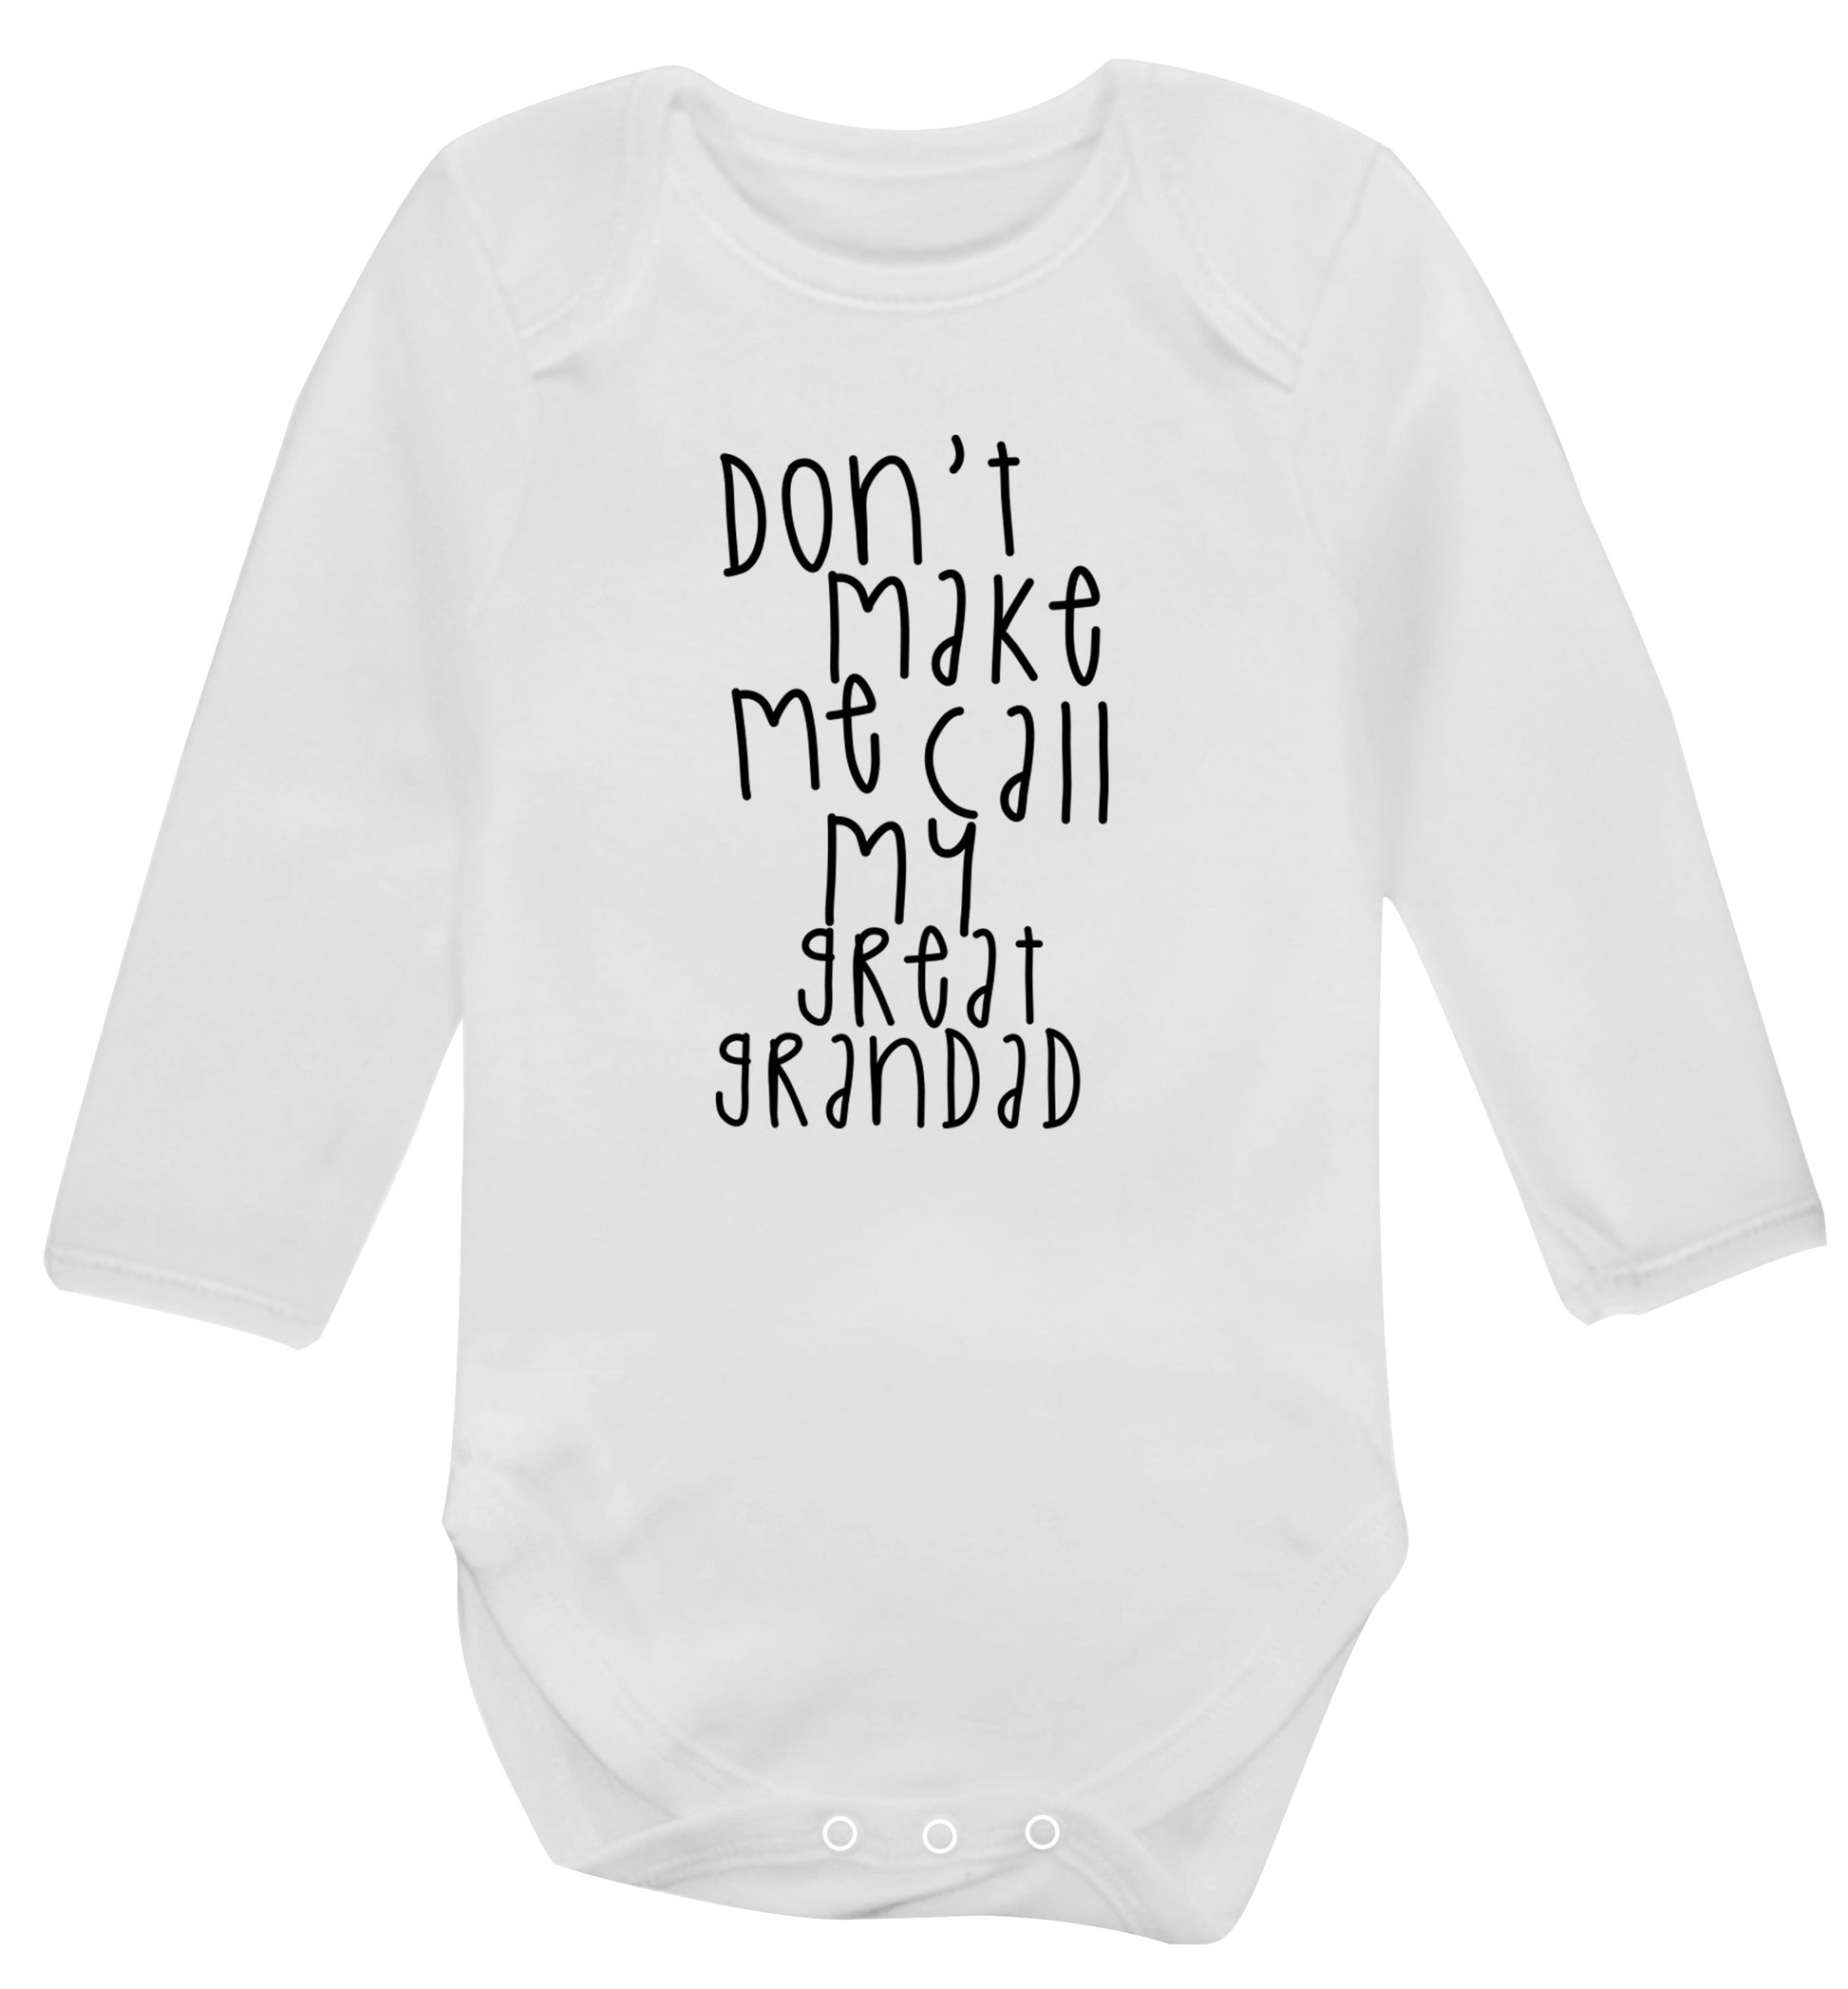 Don't make me call my great grandad Baby Vest long sleeved white 6-12 months